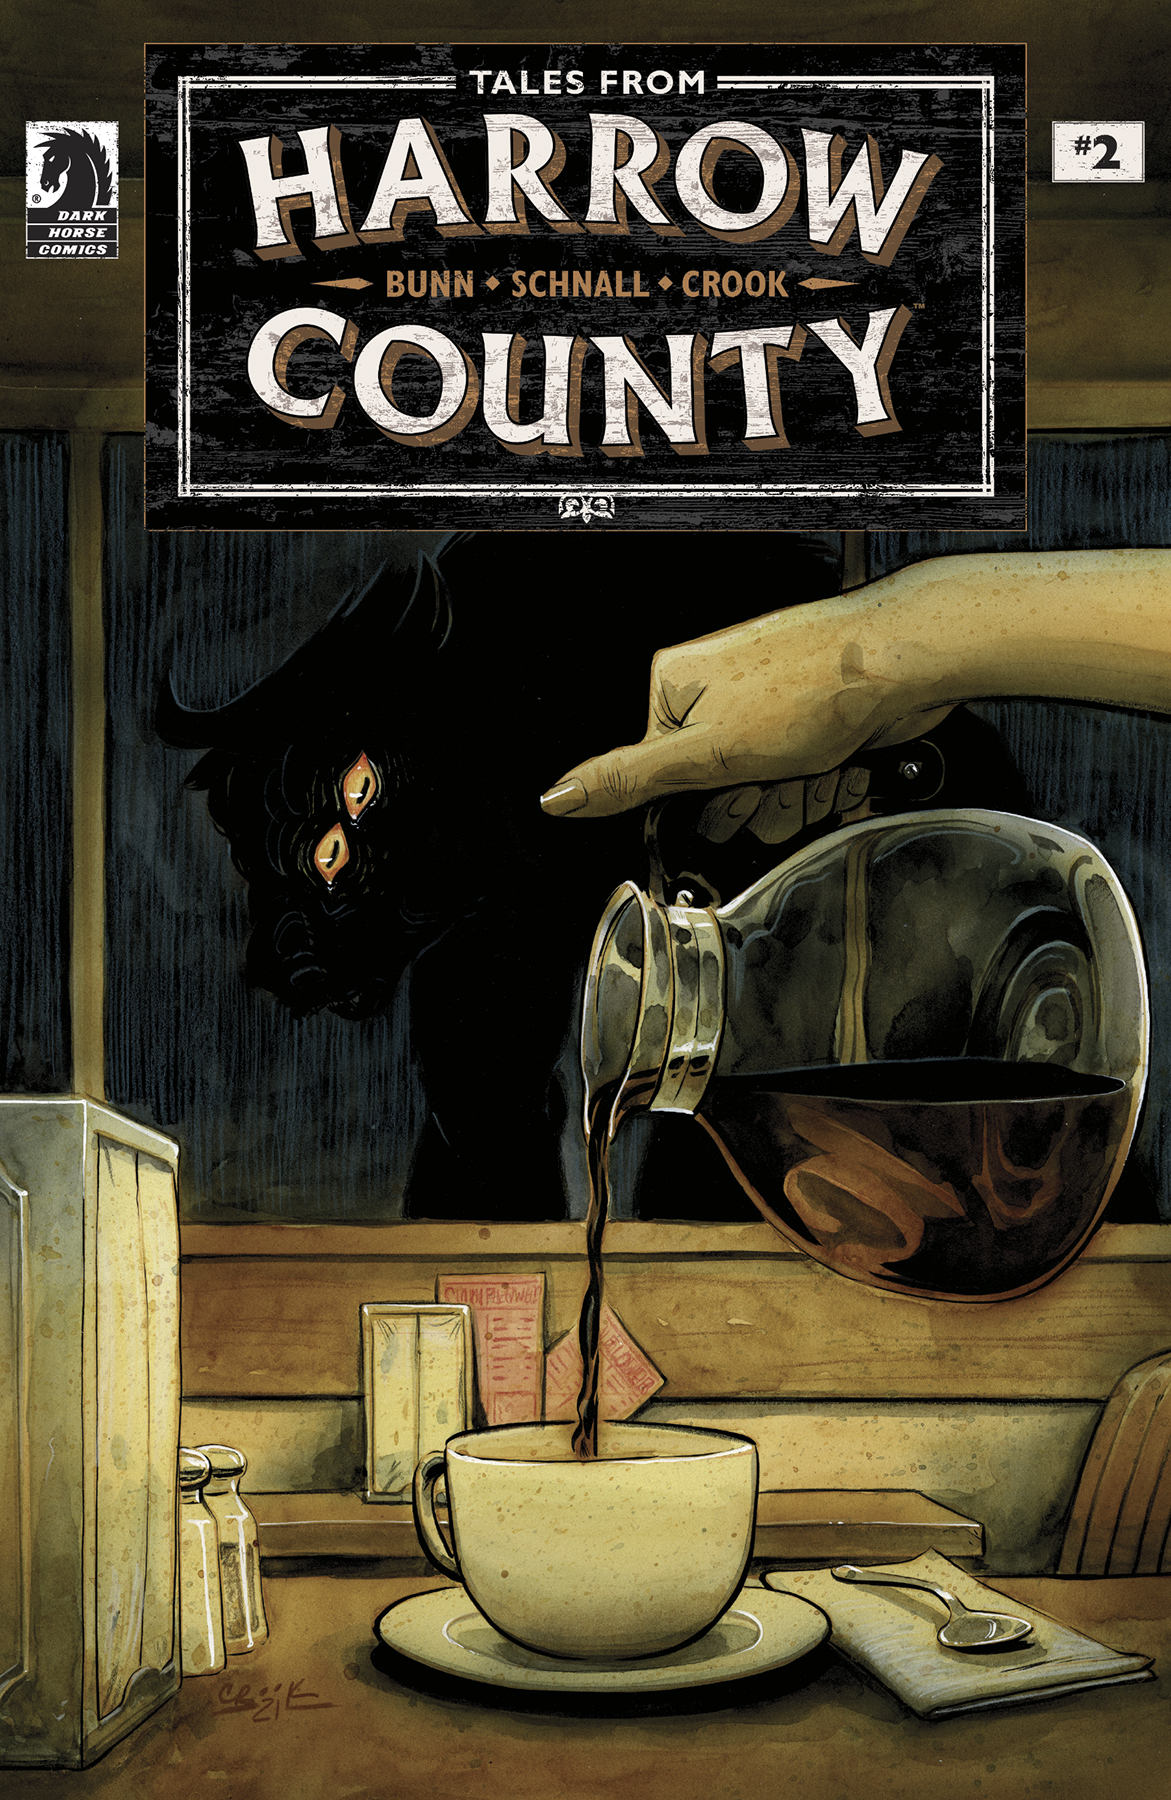 Tales From Harrow County Lost Ones #2 Cover B Crook (Of 4)